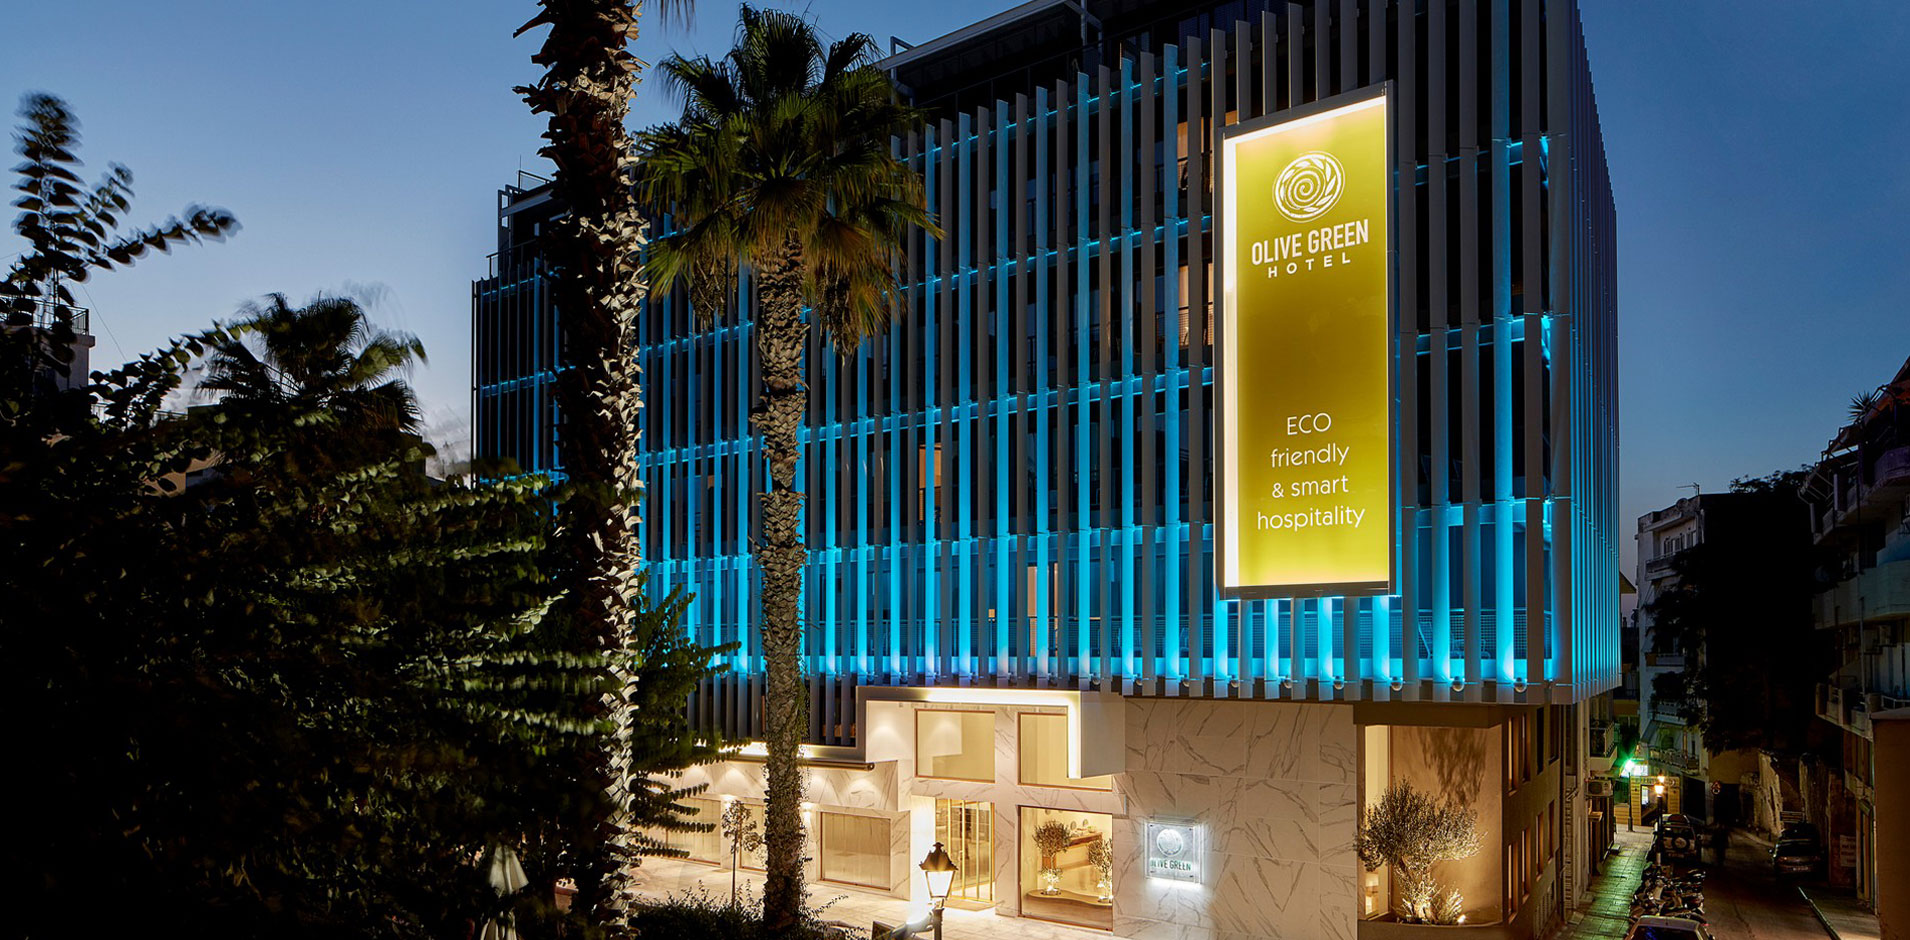 Olive Green Boutique Hotel - Your Eco-friendly Stay in Heraklion, Crete